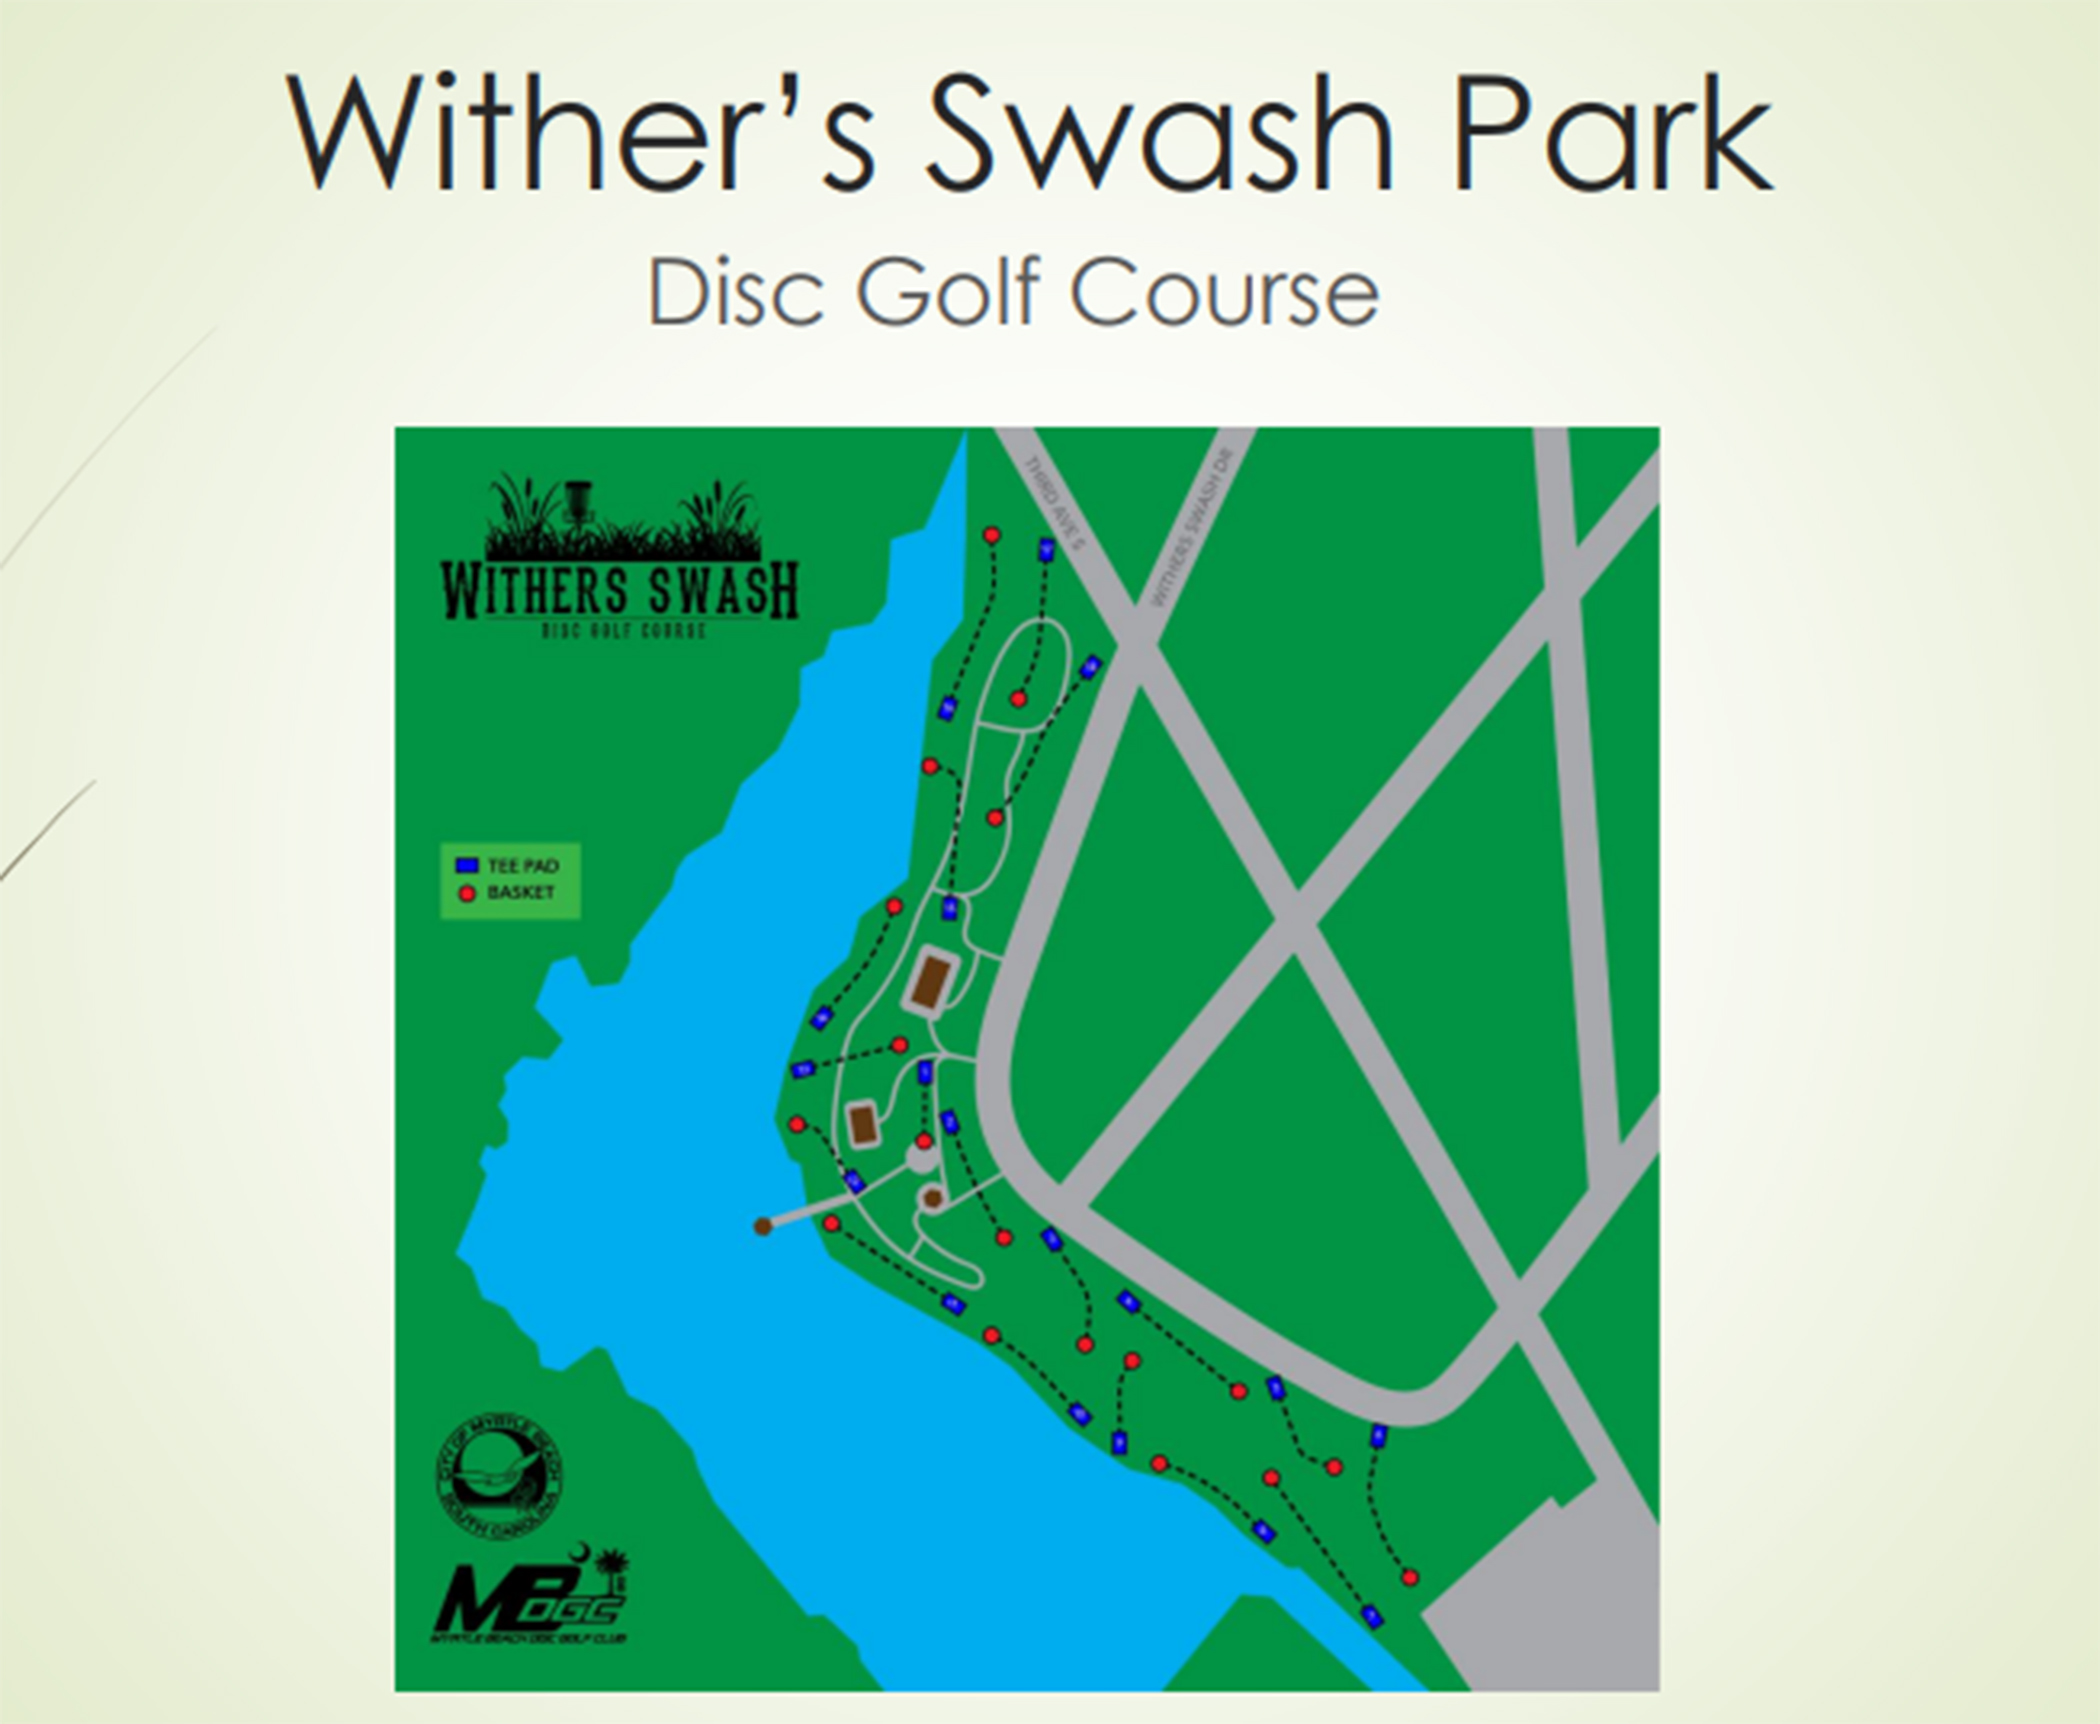 withersdiscgolf